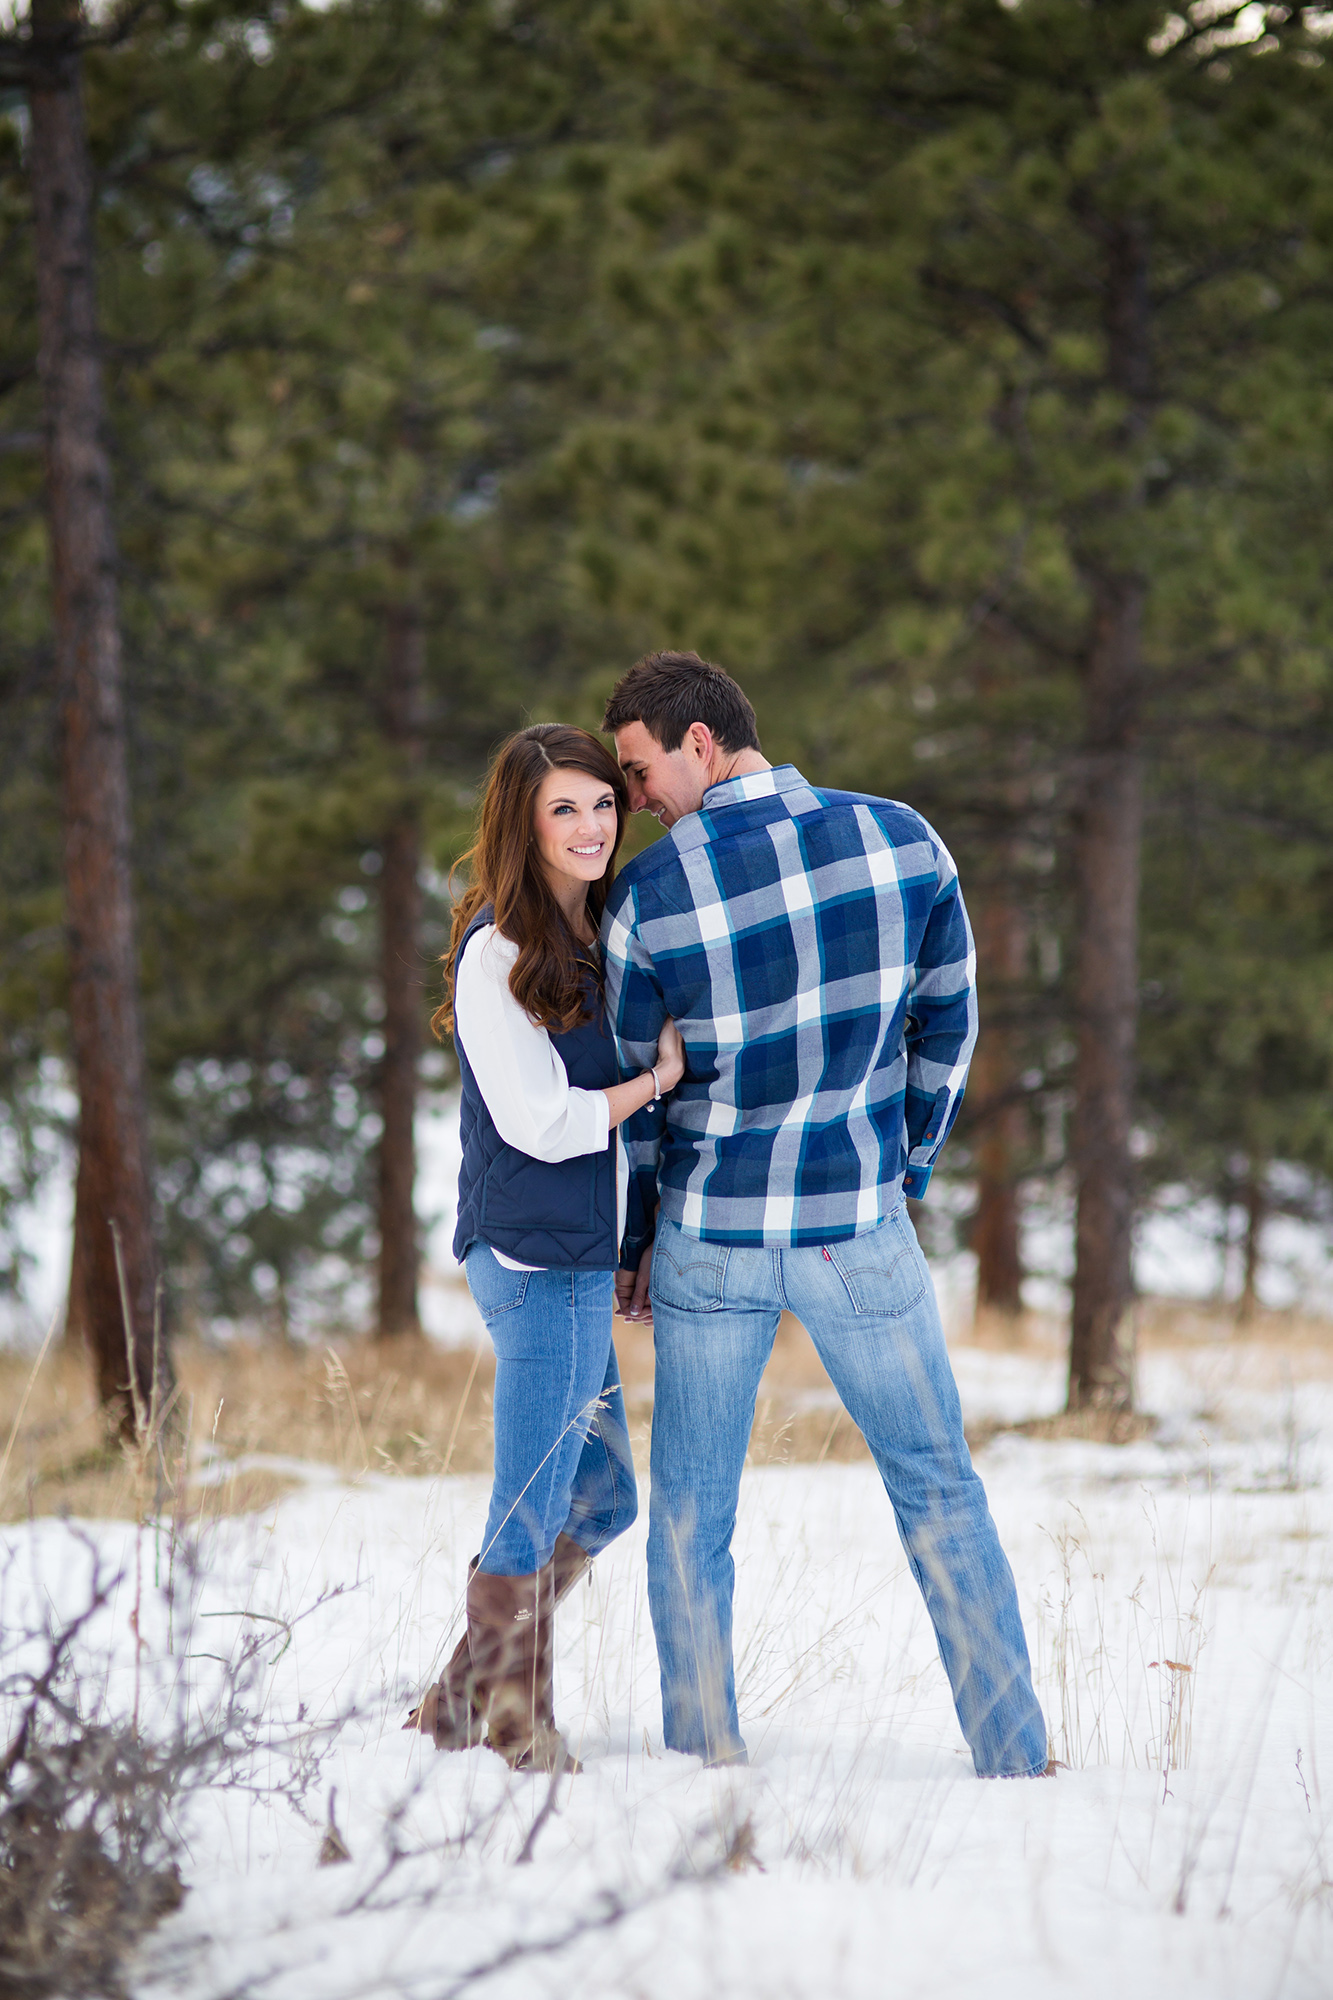 Casual Engagement photo ideas